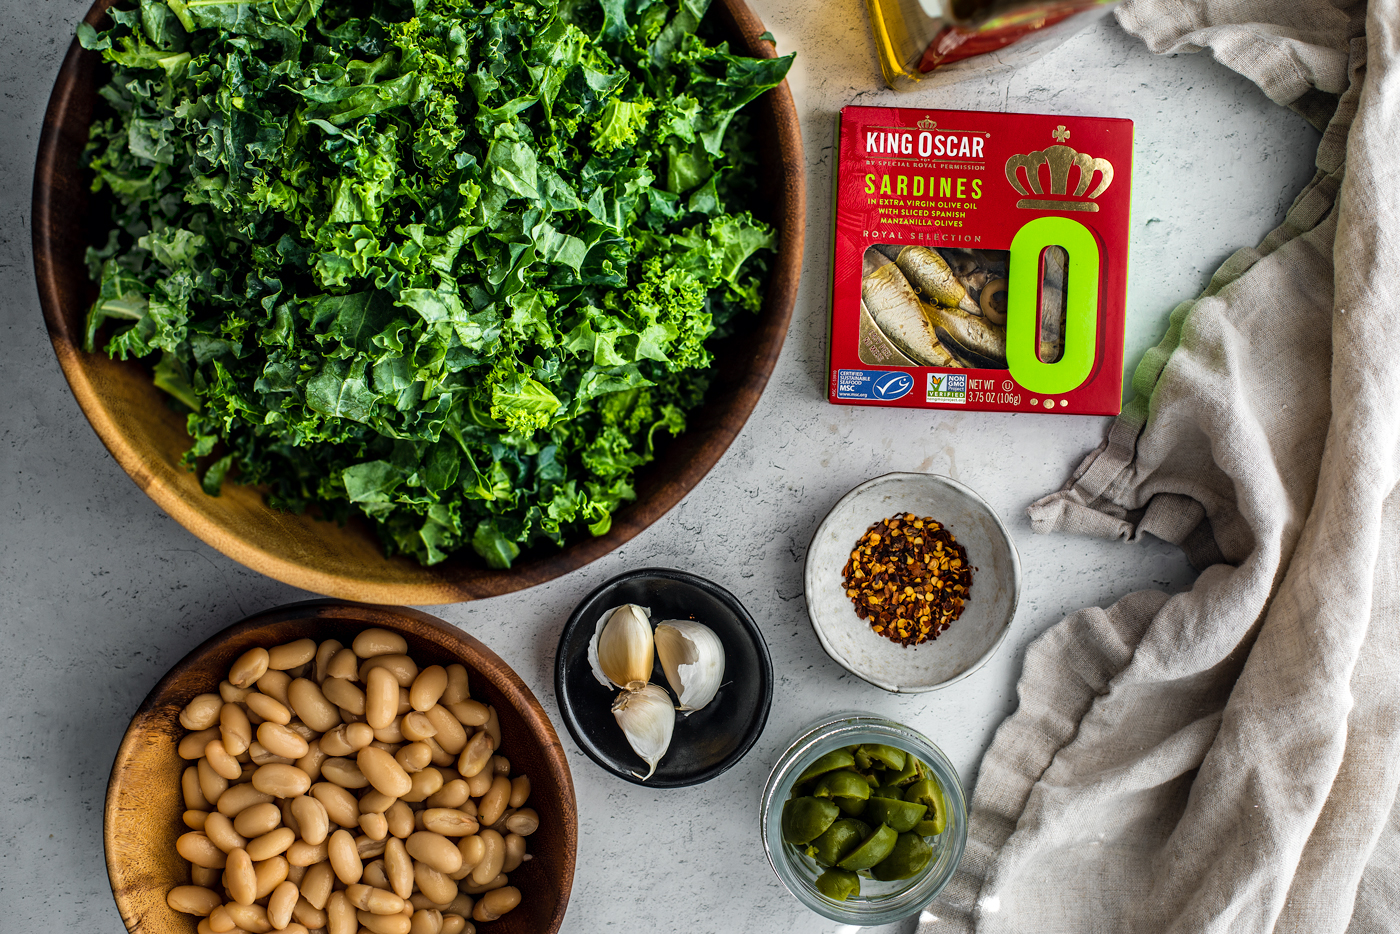 Big bowl of chopped kale, bowl of cannellini beans, garlic cloves, chili flakes, and olives next to a container of King Oscar sardines.